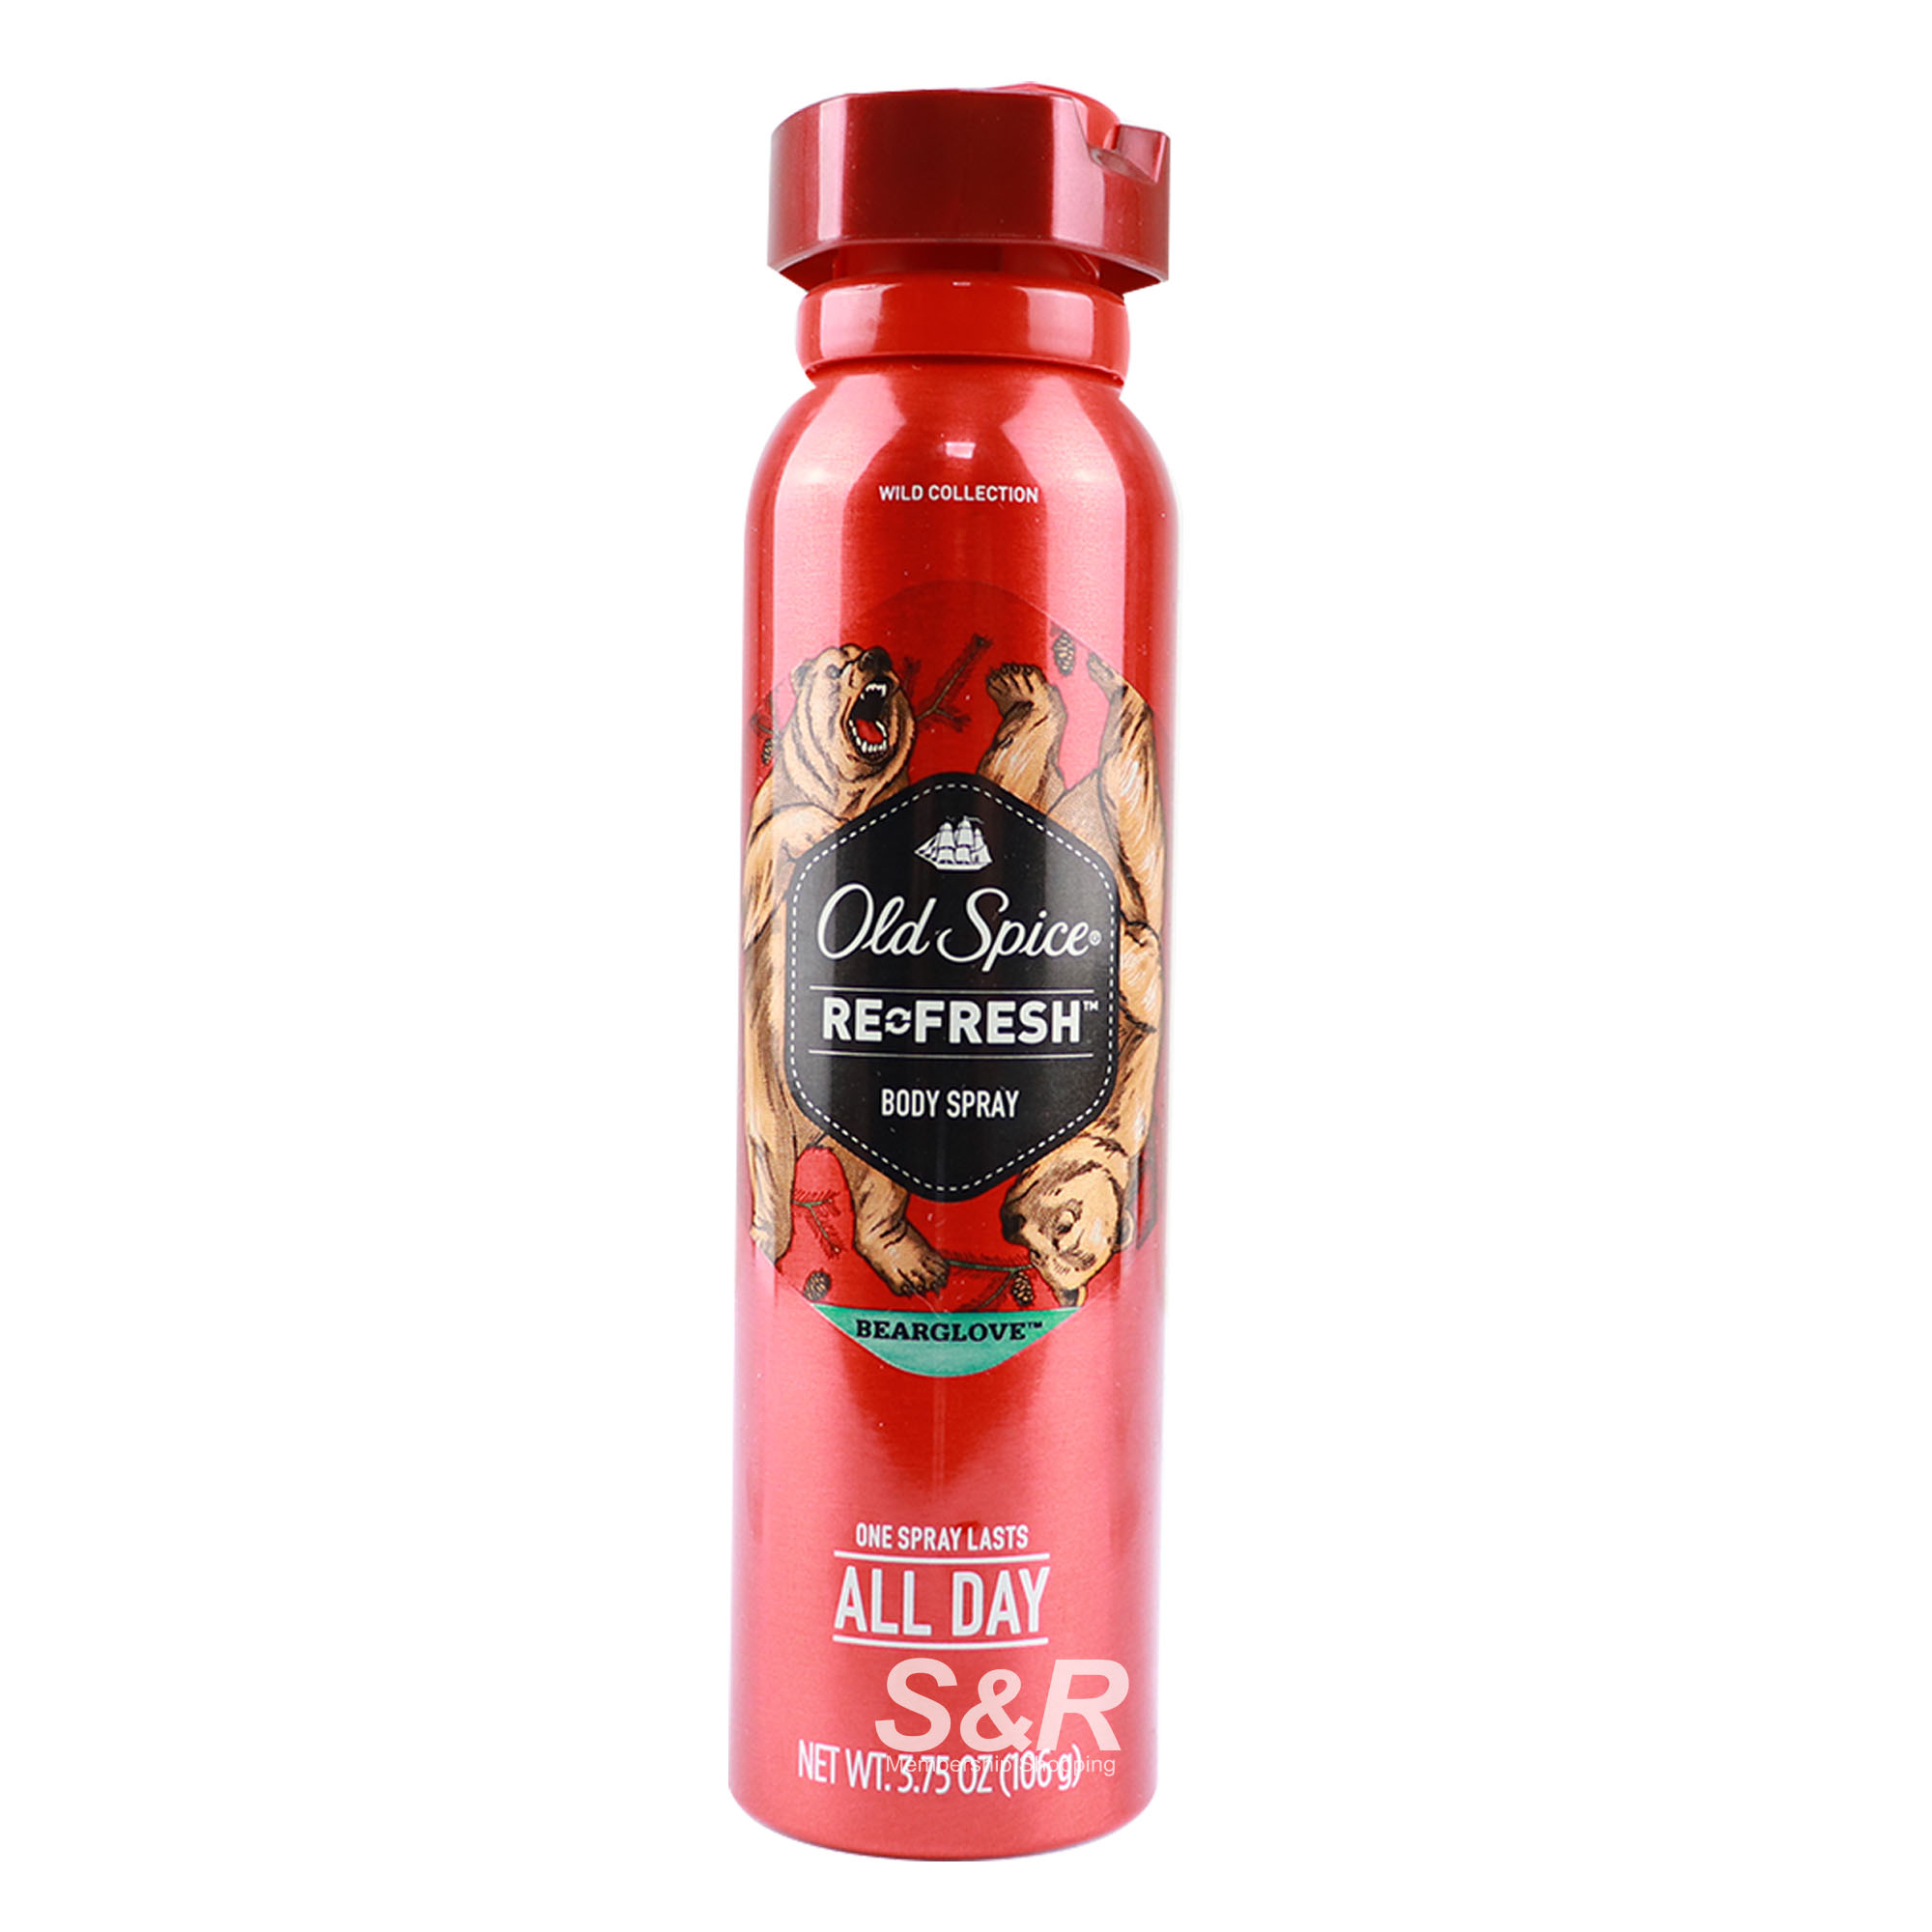 Old Spice Re Fresh All Day Body Spray Bearglove 106g